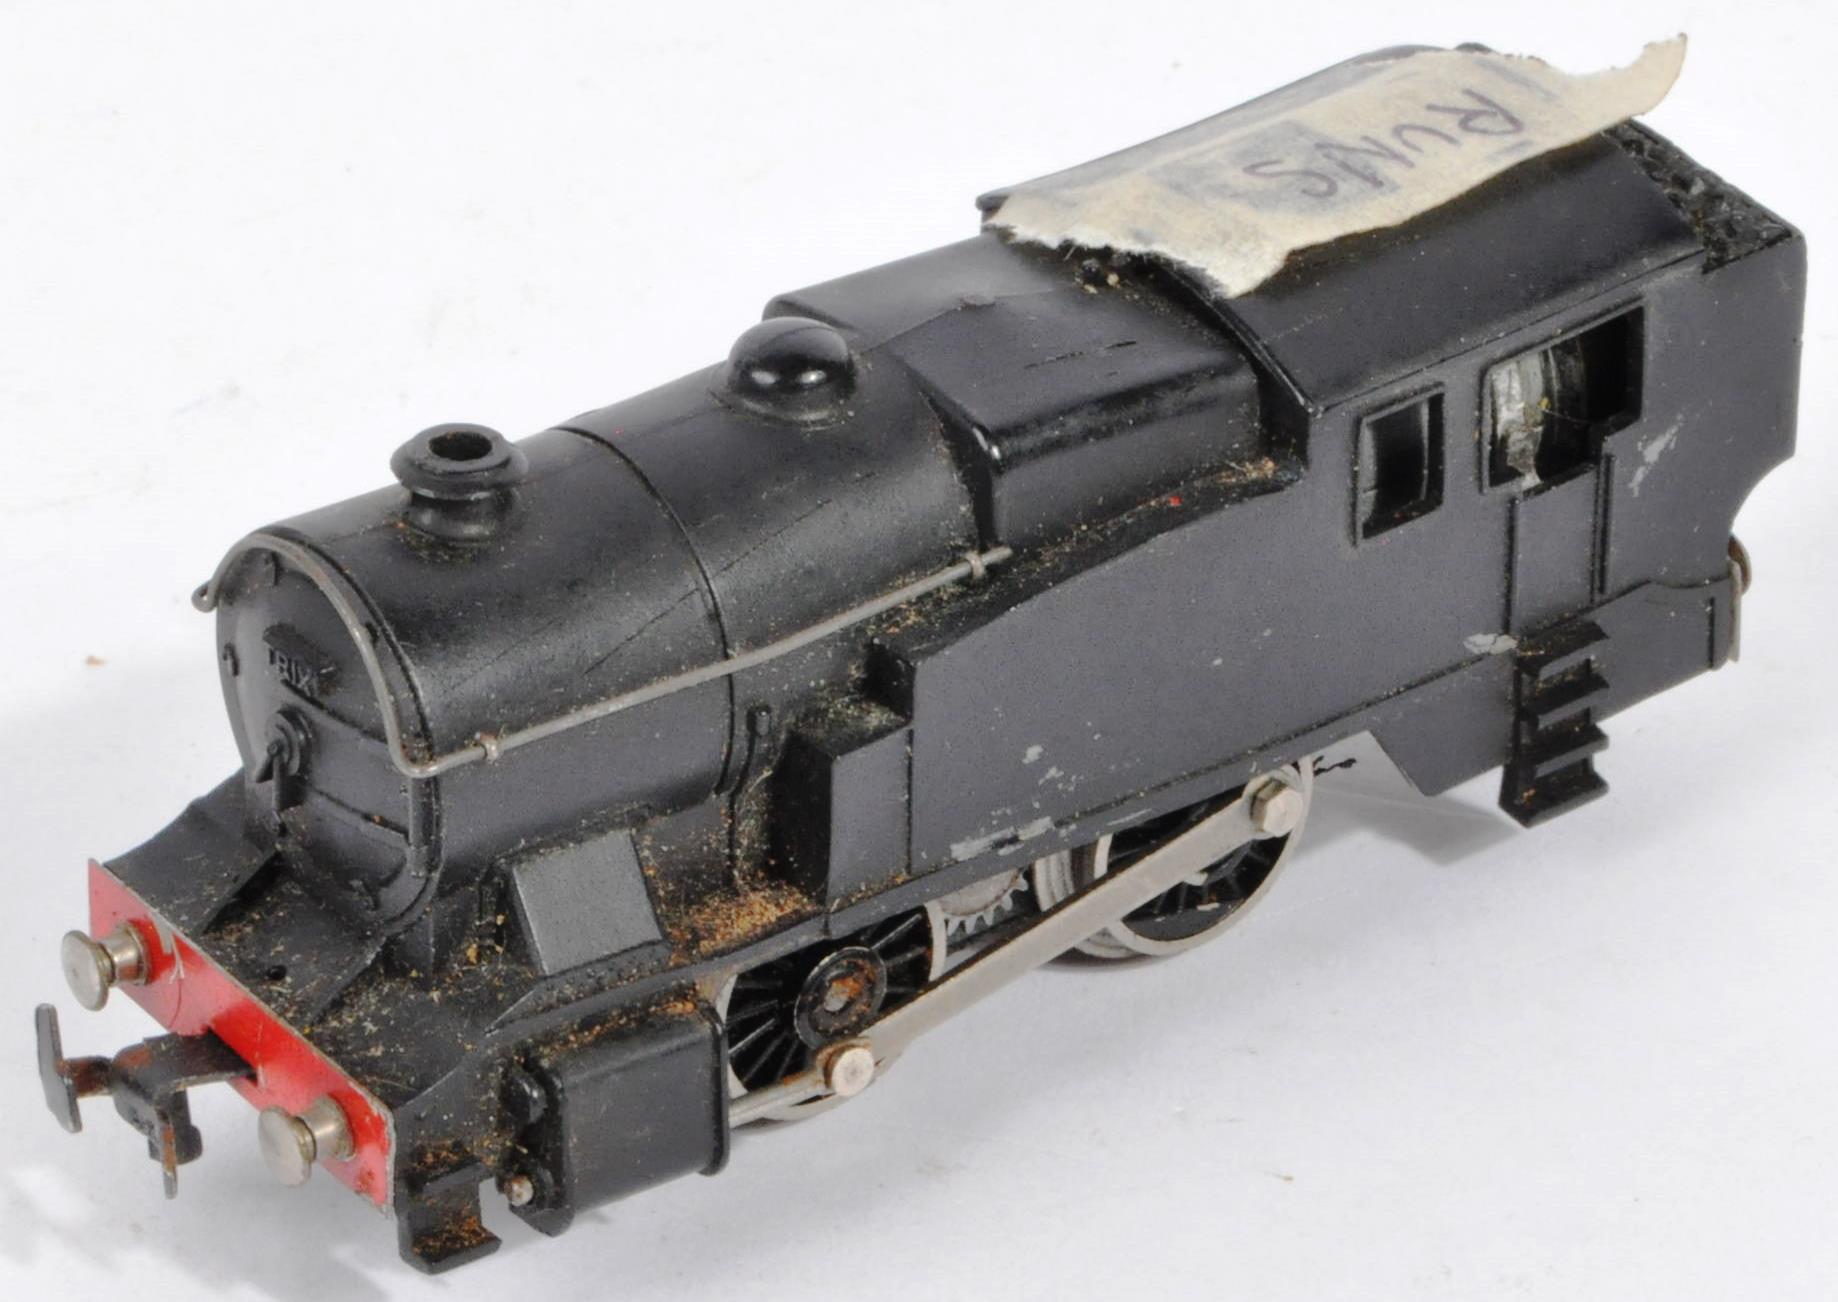 COLLECTION OF HORNBY / TRIANG TRAIN SET LOCOMOTIVE ENGINES - Image 8 of 8